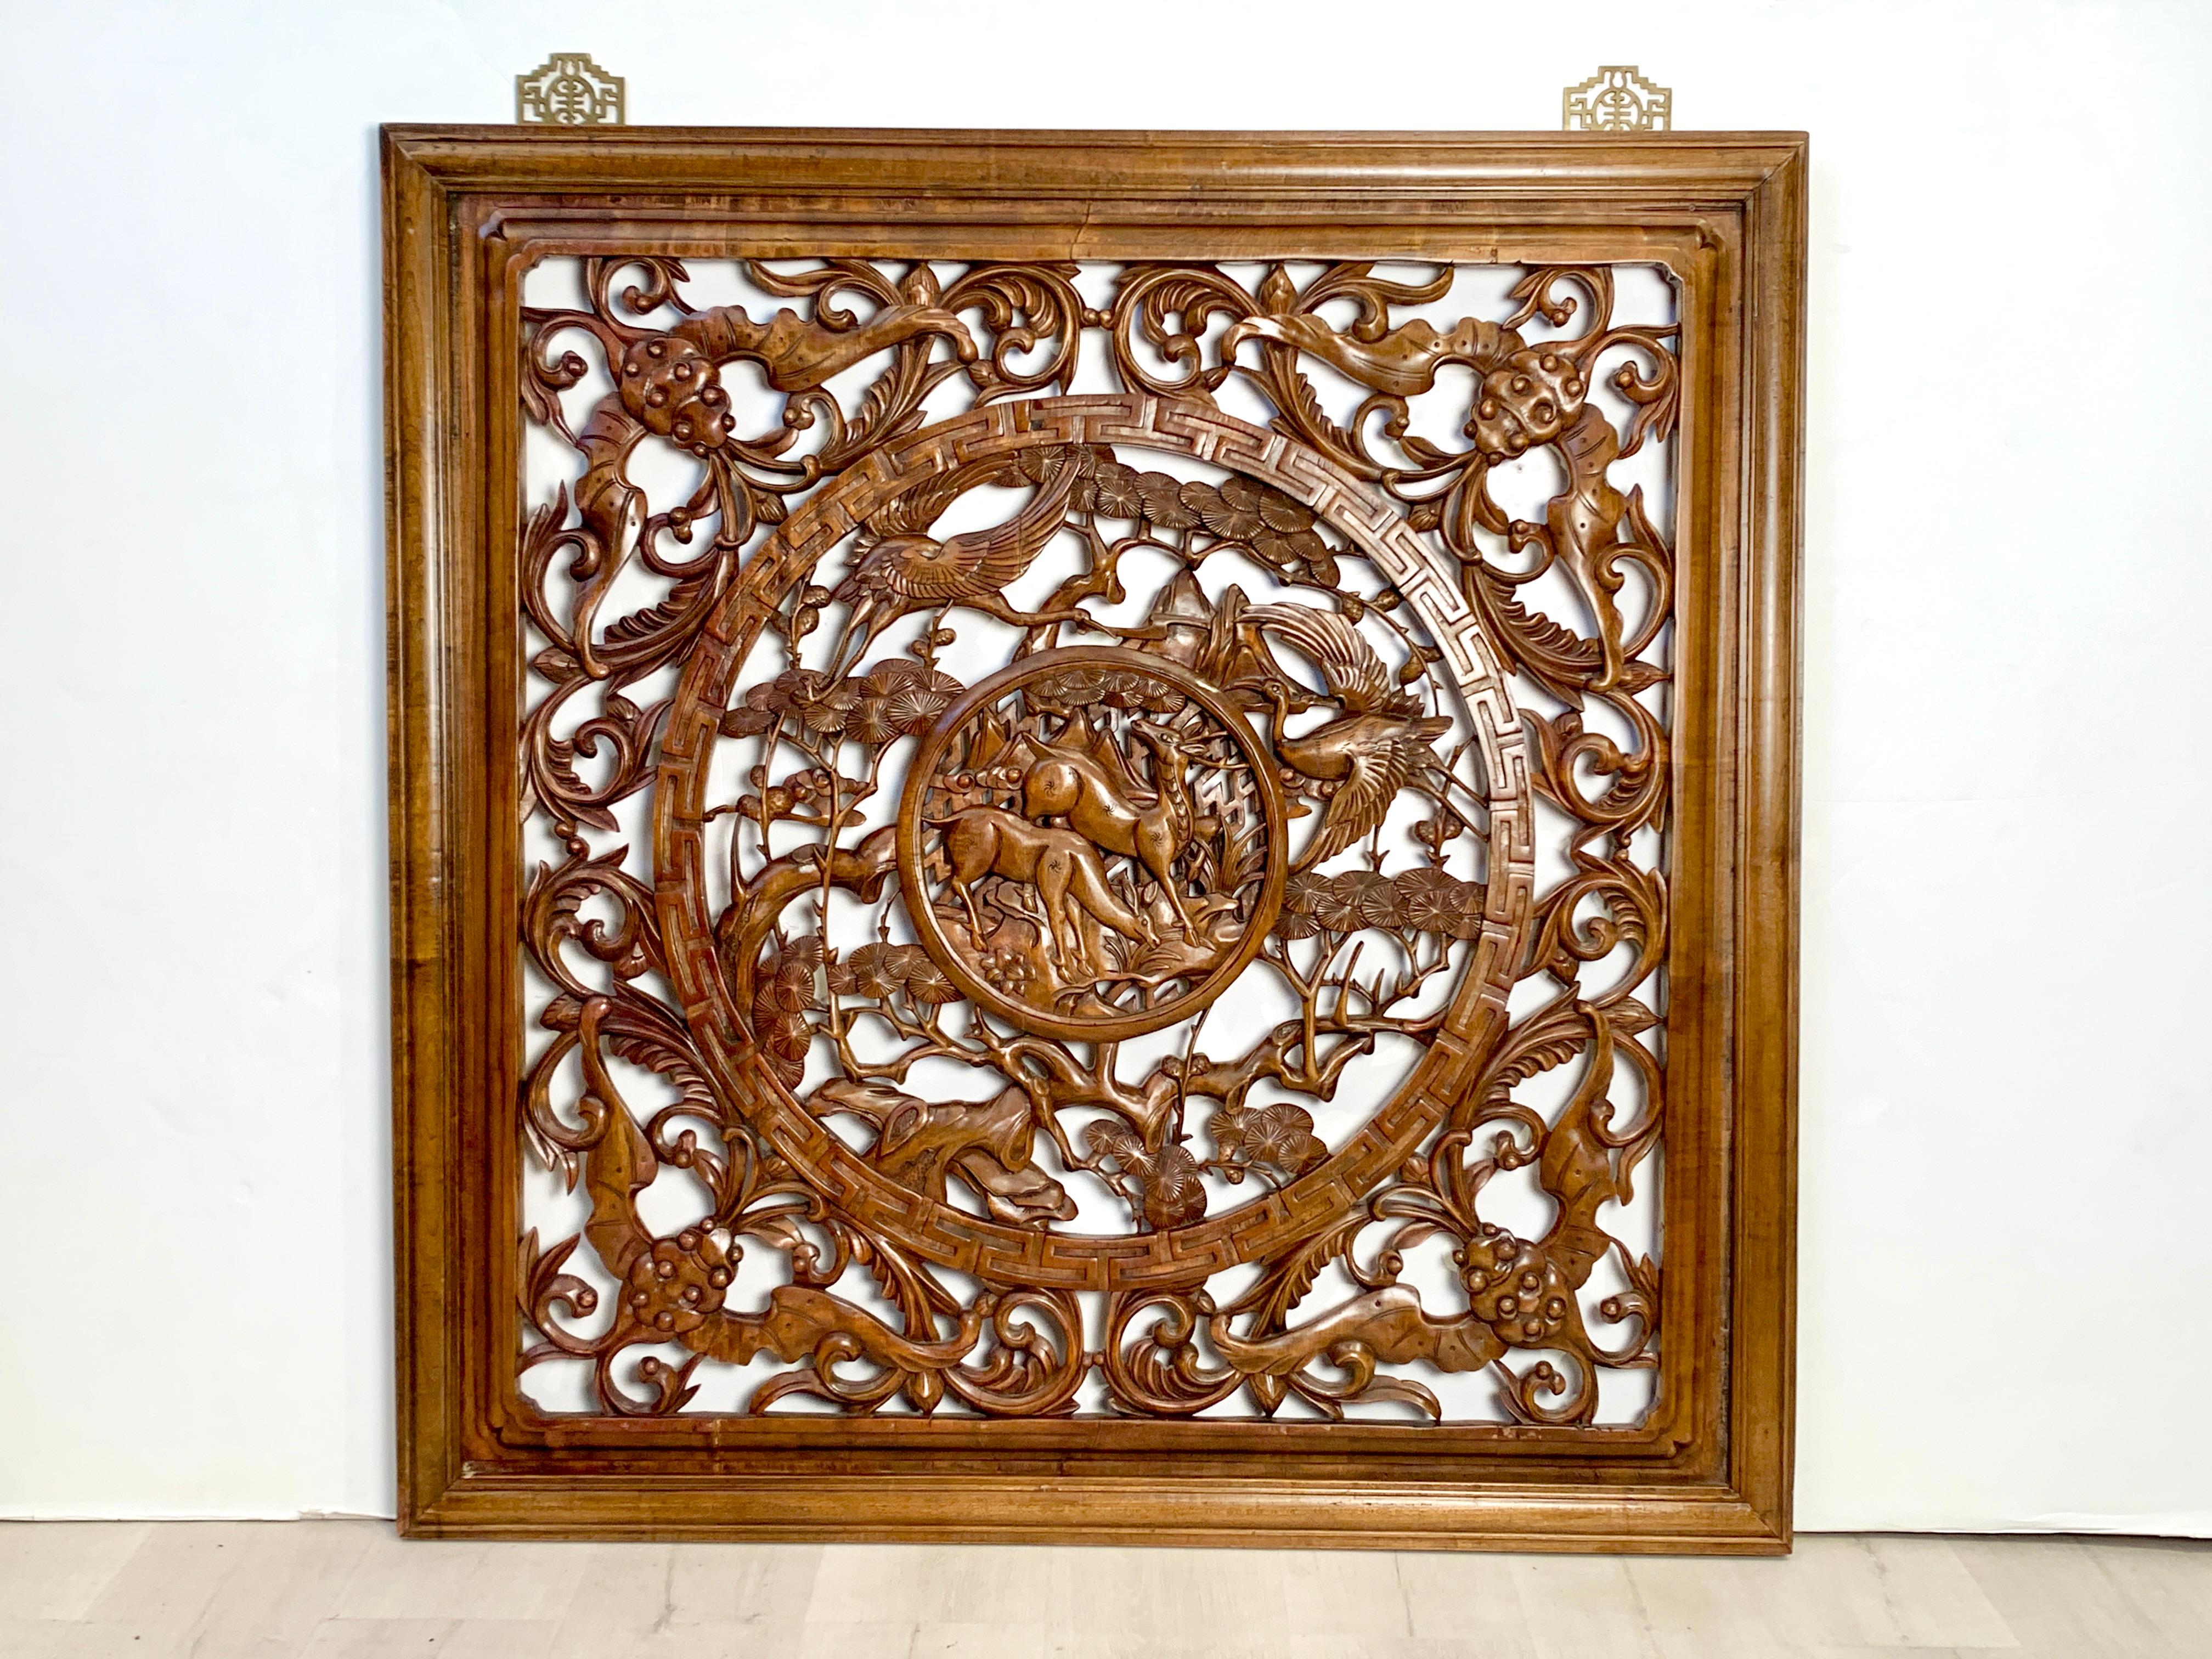 A large vintage Chinese camphor wood window screen panel, carved and pierced with longevity symbols, mid to late 20th century, China. 

The square framed carved camphor wood panel features a large roundel carved with a central image of a pair of